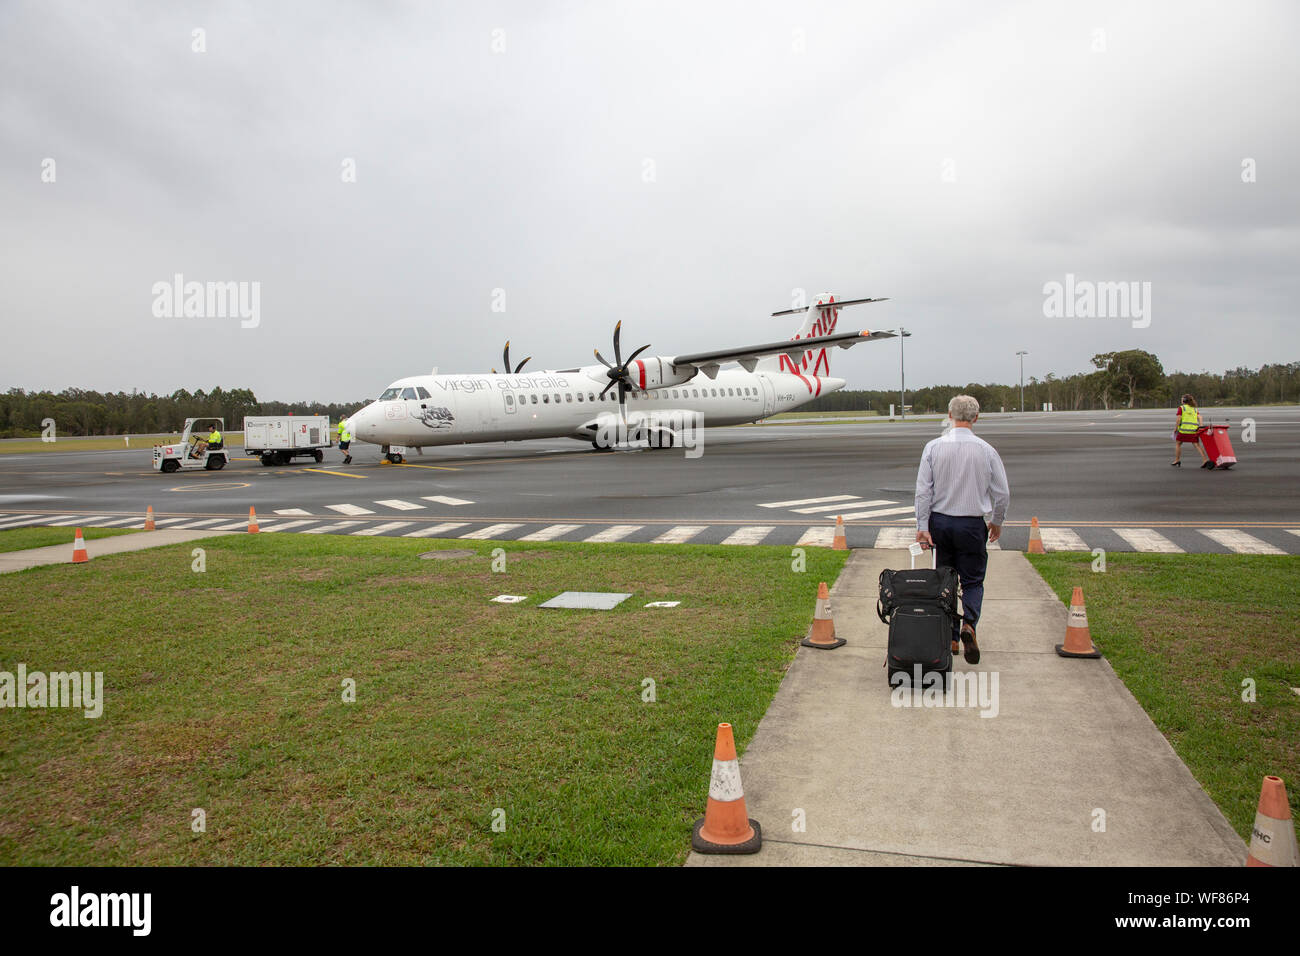 Australian business man airside at the airport carrying luggage to board Virgin australia plane Stock Photo